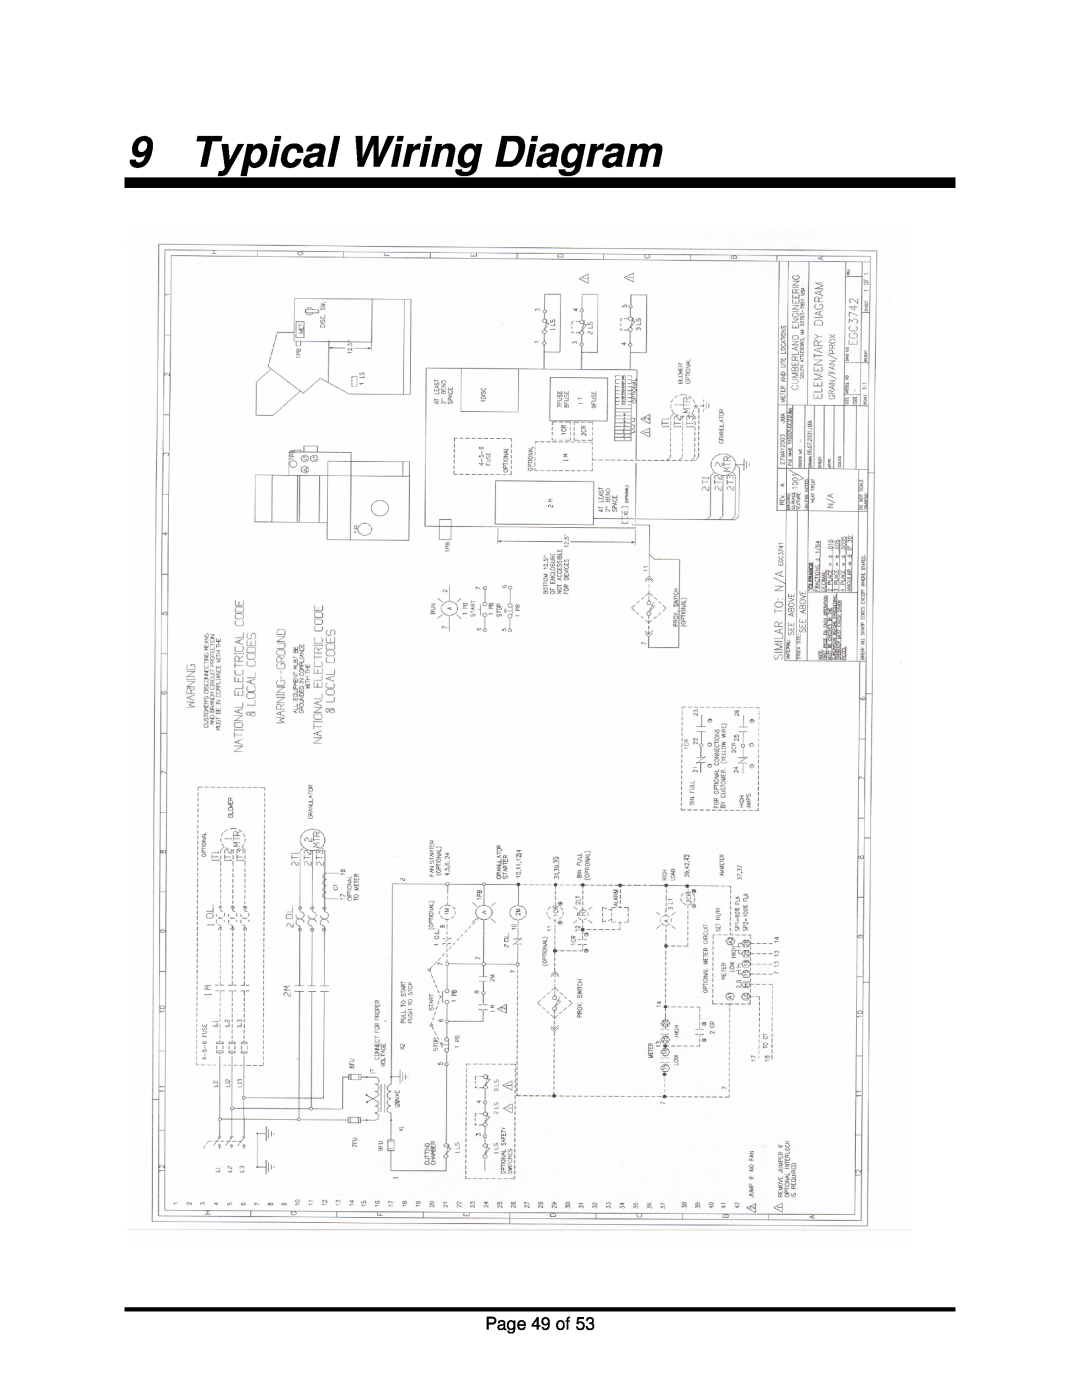 Sterling BP1012, BP1018 installation manual Typical Wiring Diagram, Page 49 of 